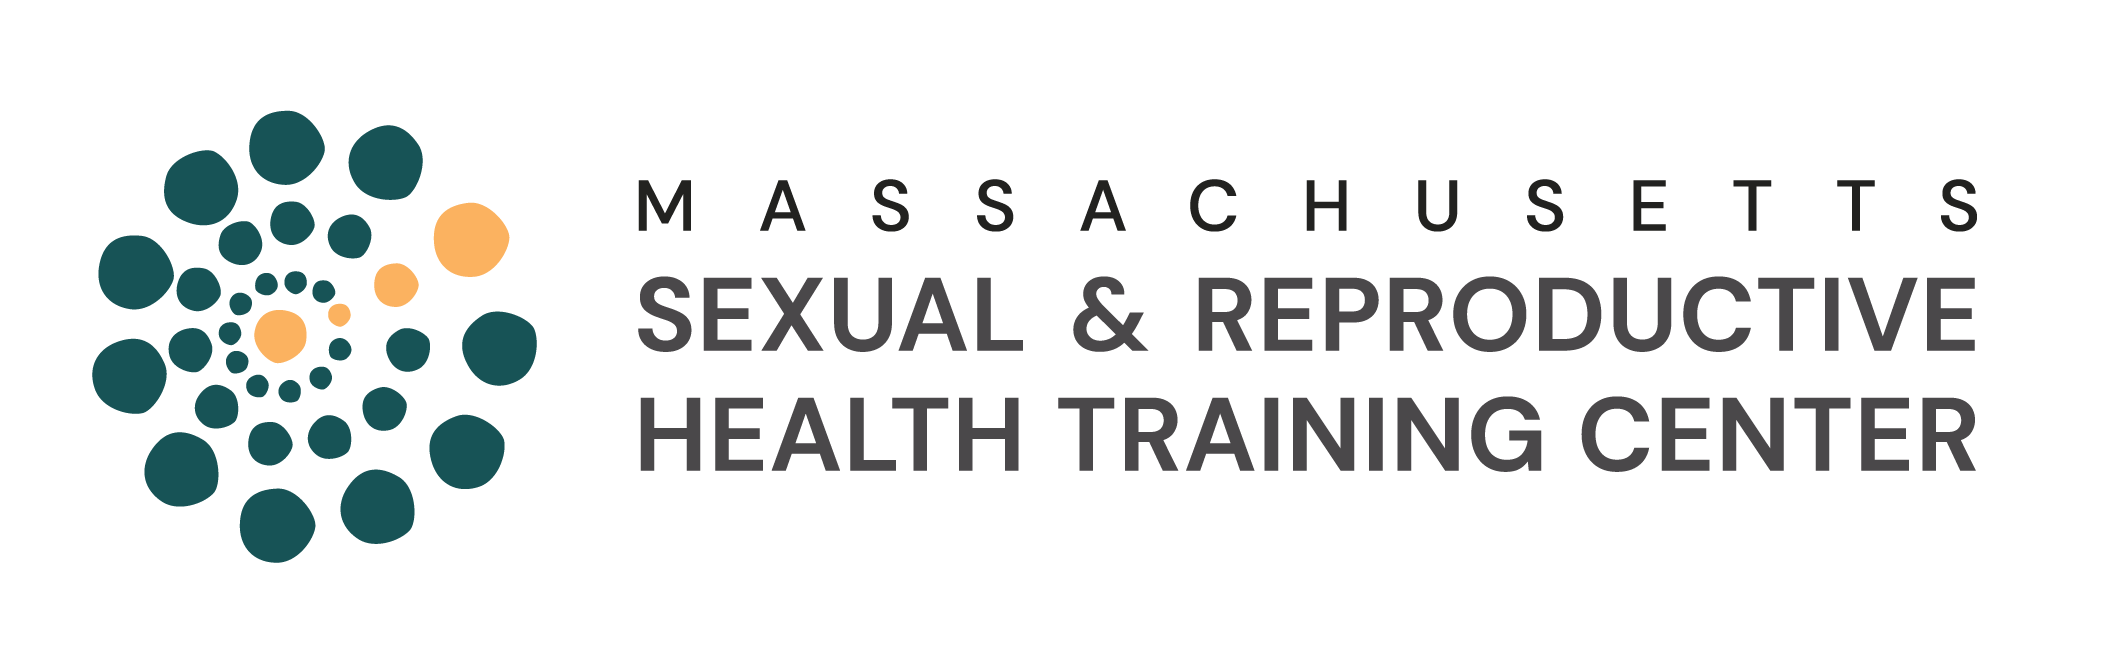 The Massachusetts Sexual and Reproductive Health Training Center